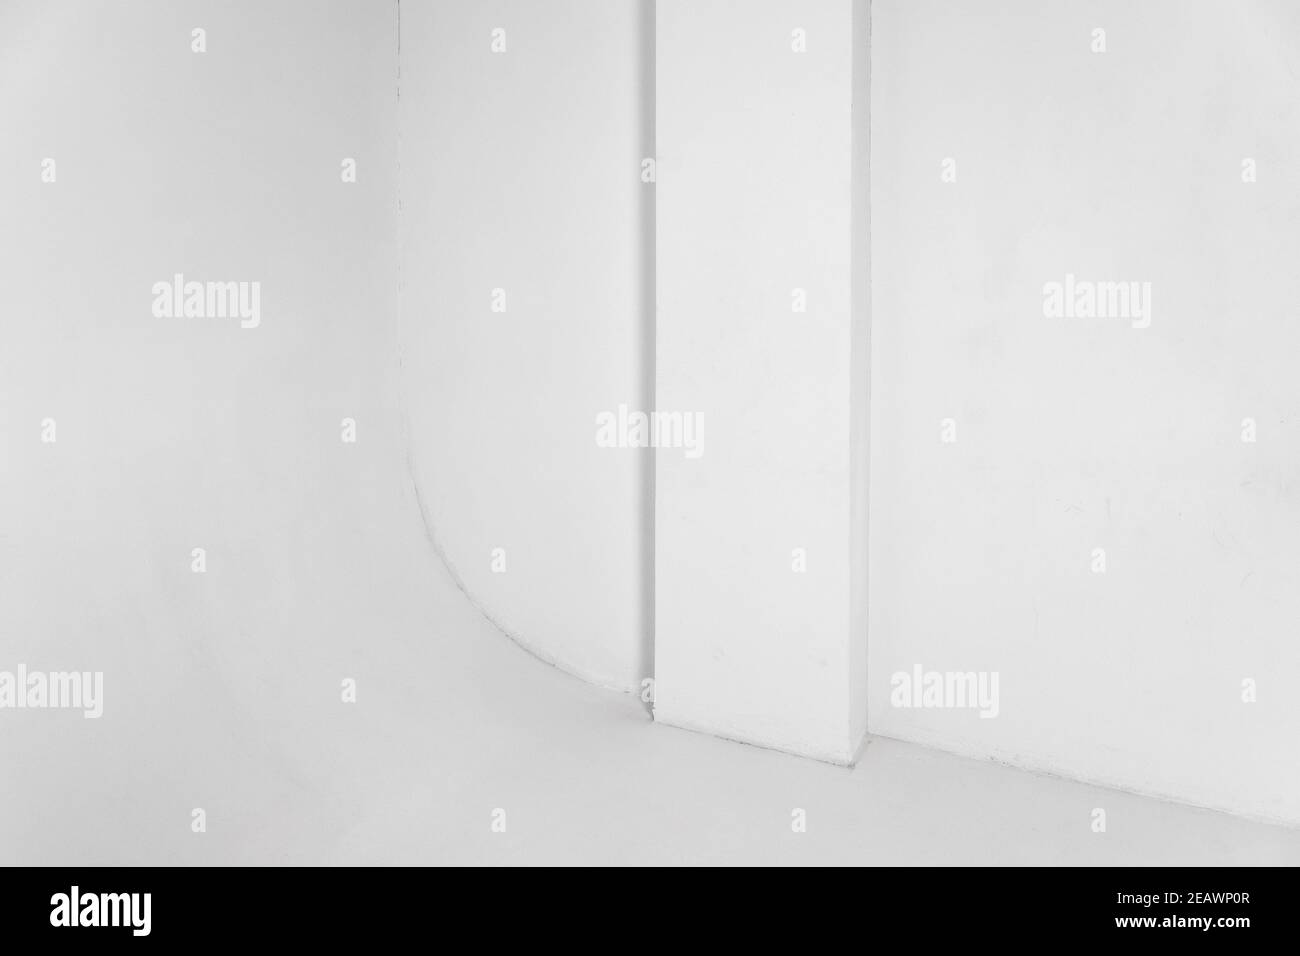 Empty white photo studio interior background, cyclorama structure with a smooth transition between horizontal and vertical planes Stock Photo